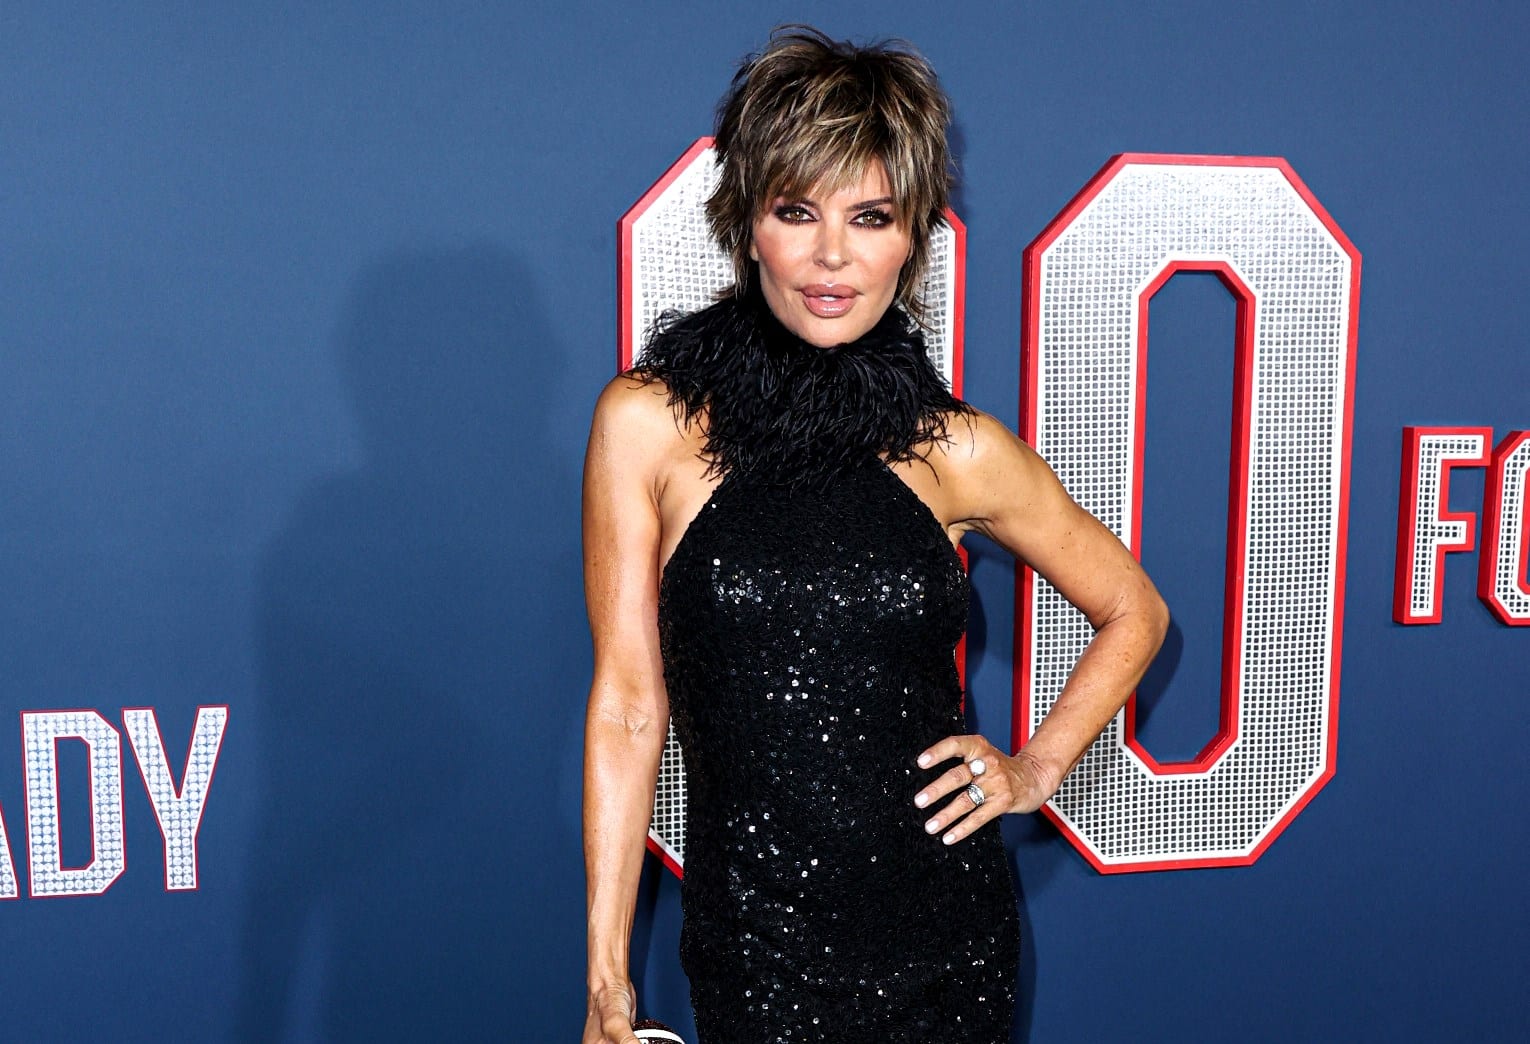 RHOBH Alum Lisa Rinna's Rep Denies She "Blindsided" Rinna Beauty Team With Firing, Explains Why Company Terminated Contract